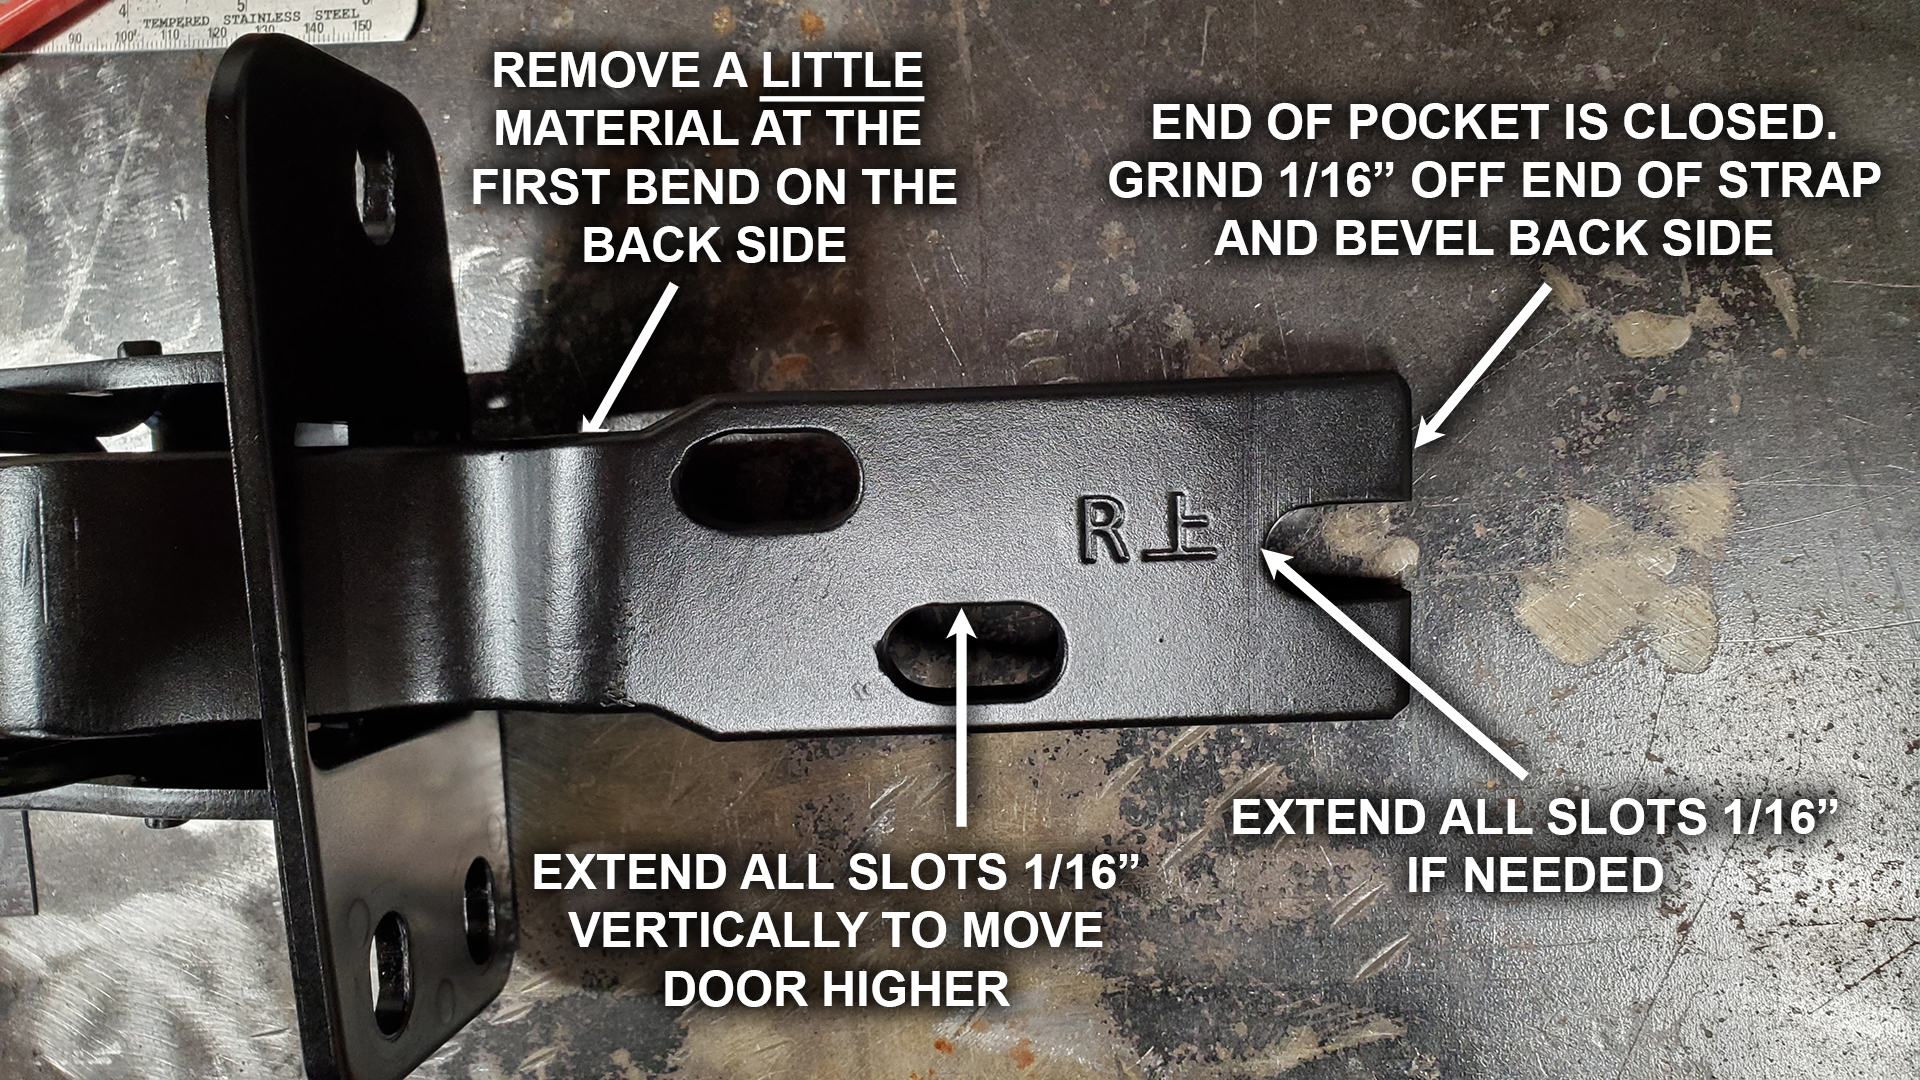 Extend slots and Grind end of strap